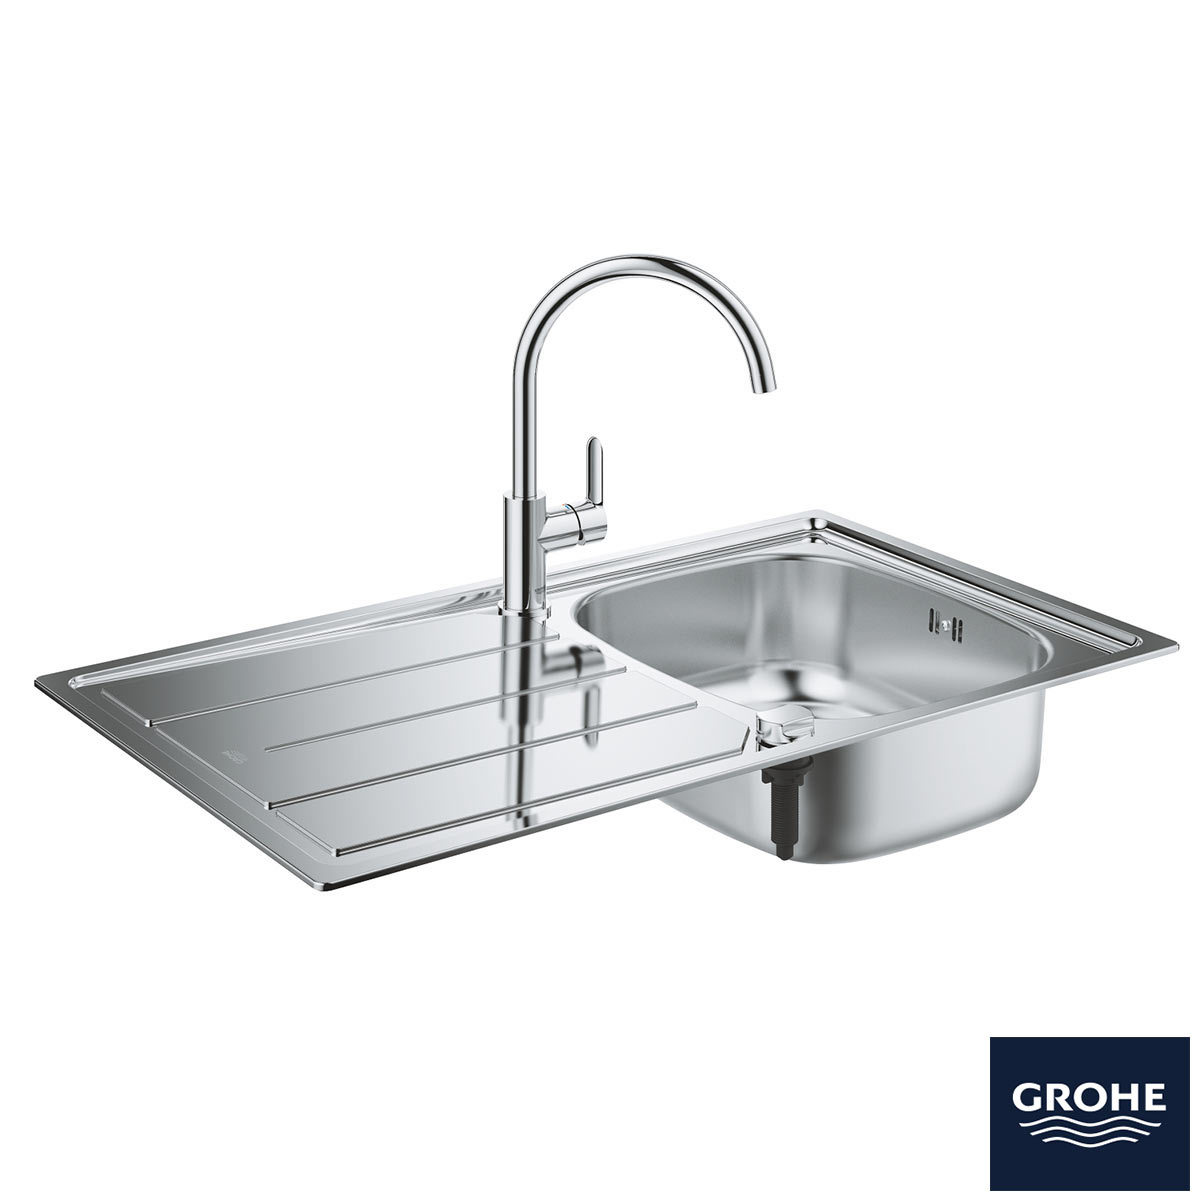 Grohe K200 Stainless Steel Sink And Bau Single Lever Mixer Tap Bundle In Chrome Model 31562sd0 Costco Uk